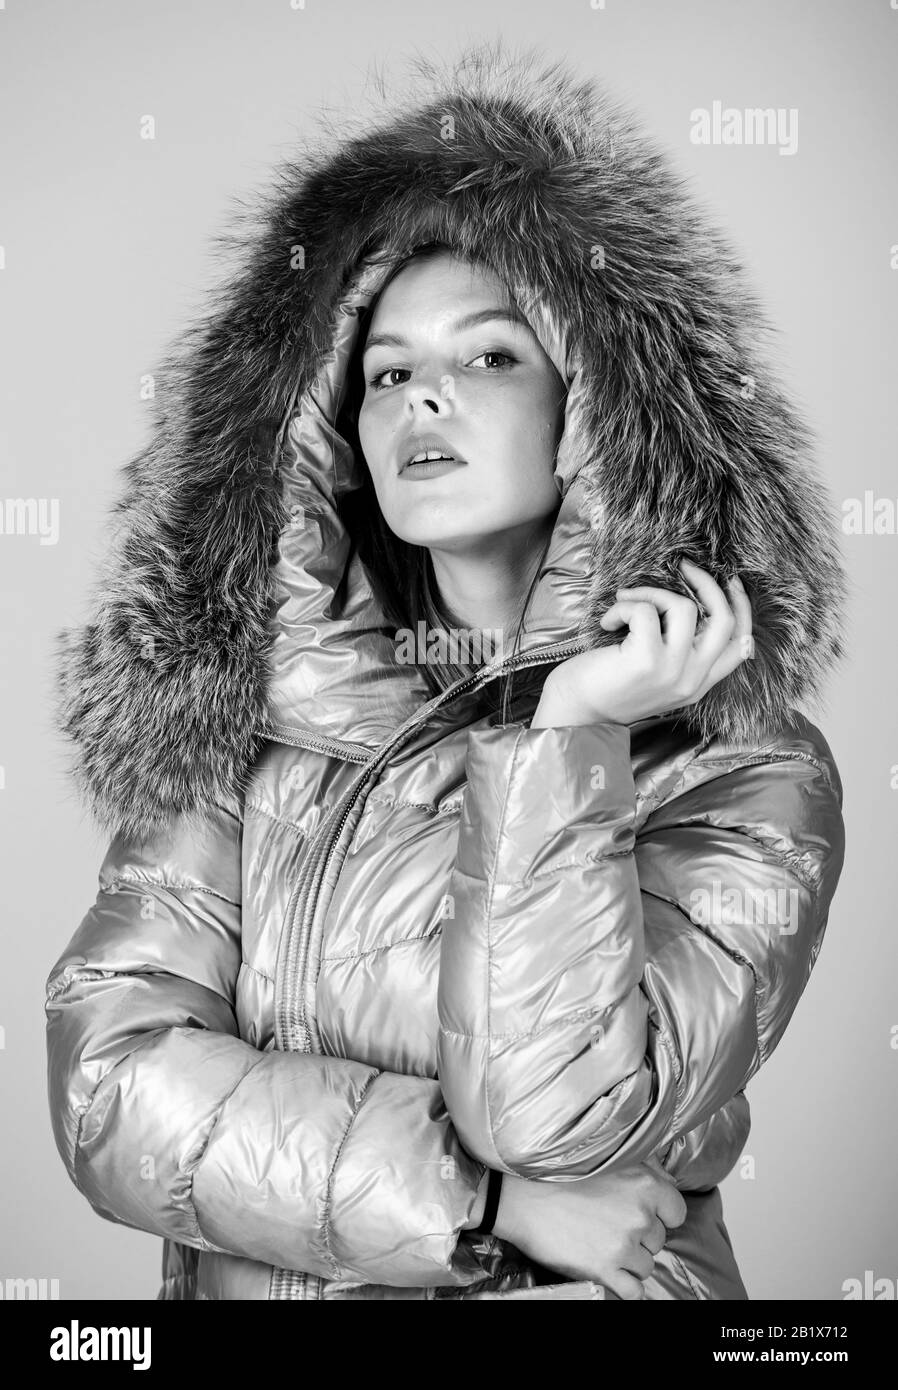 Winter clothing hood Black and White Stock Photos & Images - Page